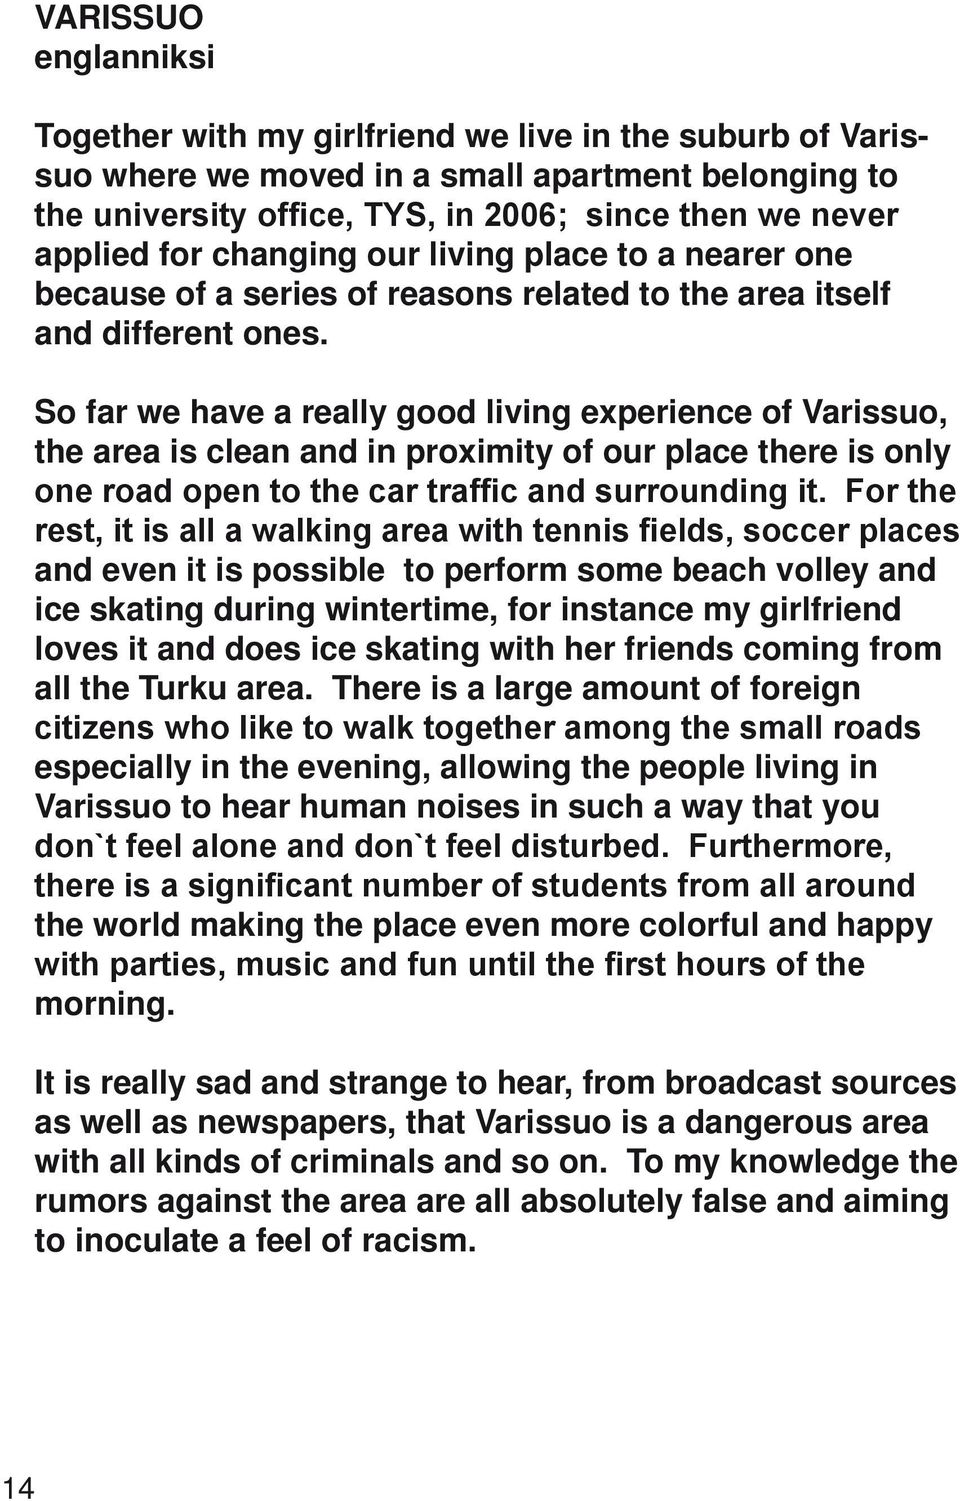 So far we have a really good living experience of Varissuo, the area is clean and in proximity of our place there is only one road open to the car traffic and surrounding it.